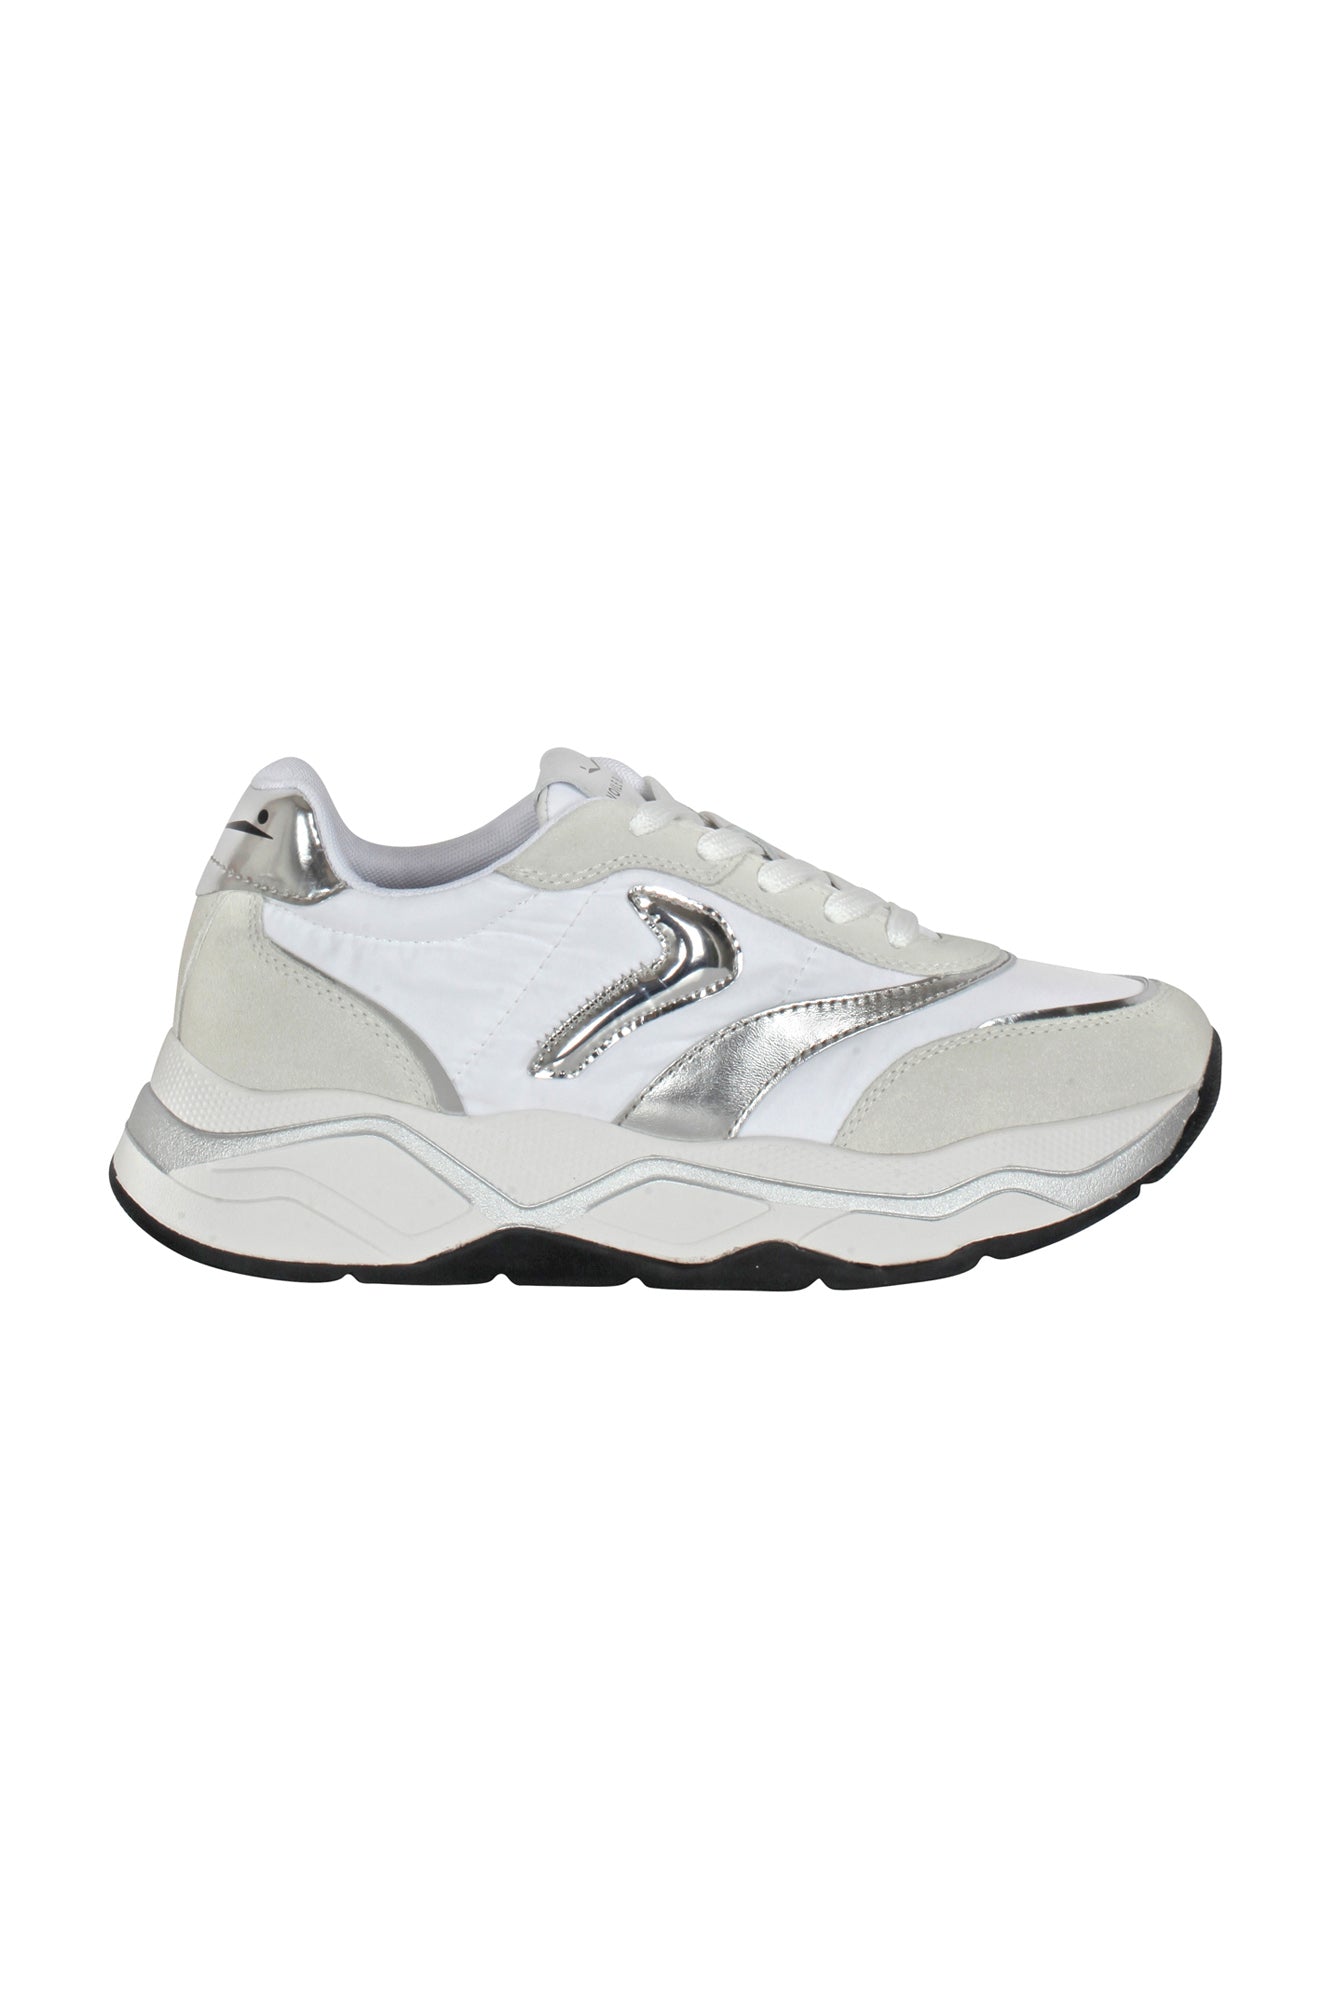 Voile Blanche - Sneakers - 430013 - Bianco/Argento